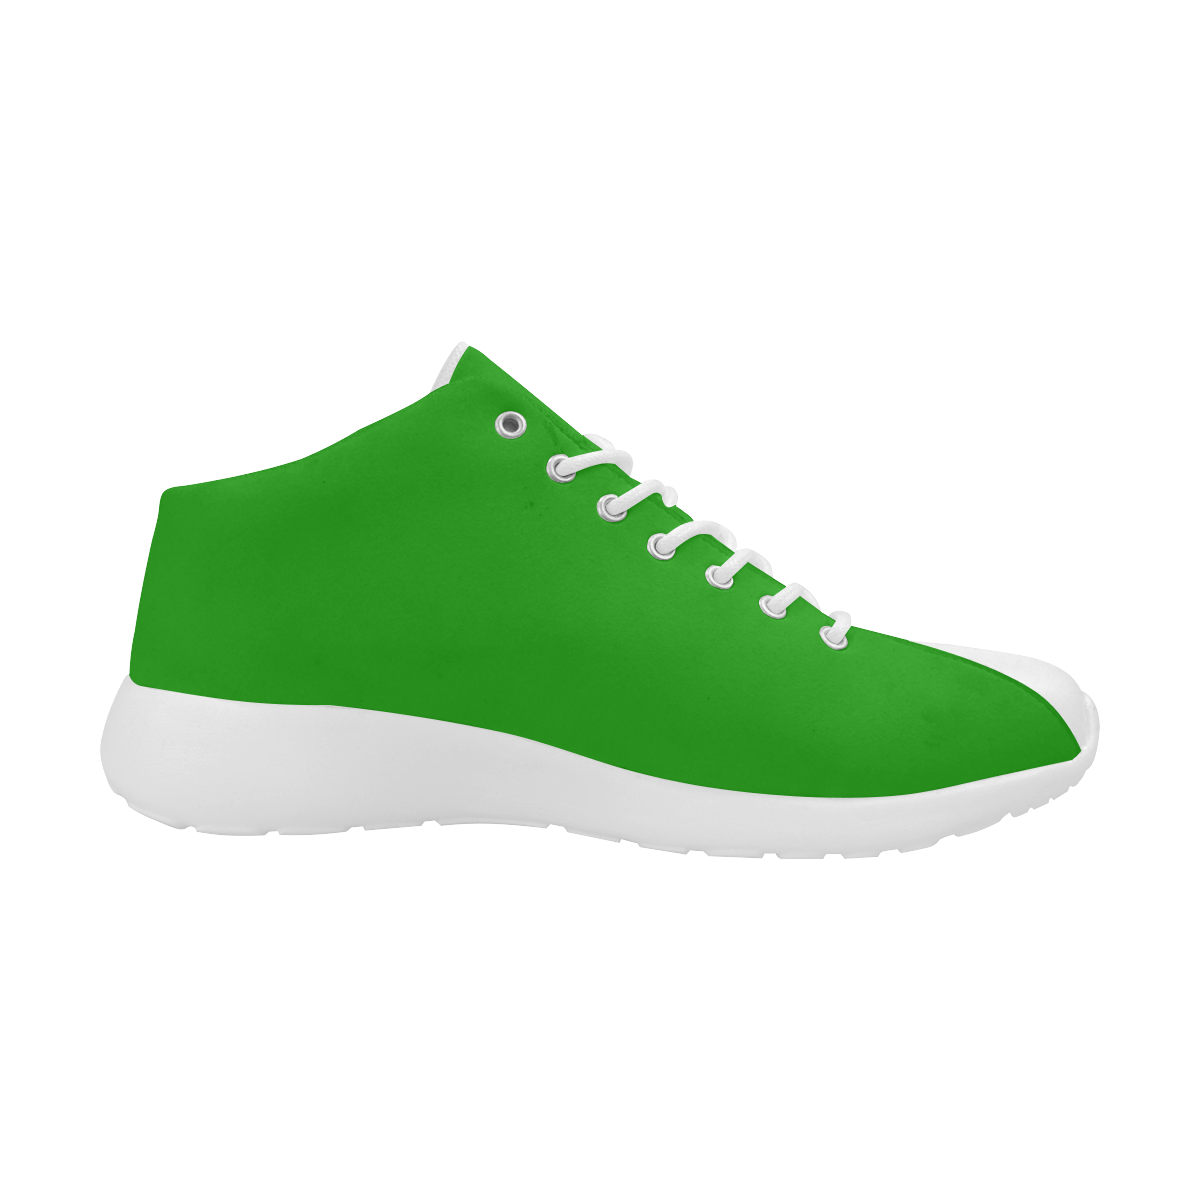 Notable Neon Green Solid Colored Women's Basketball Training Shoes/Large Size (Model 47502)